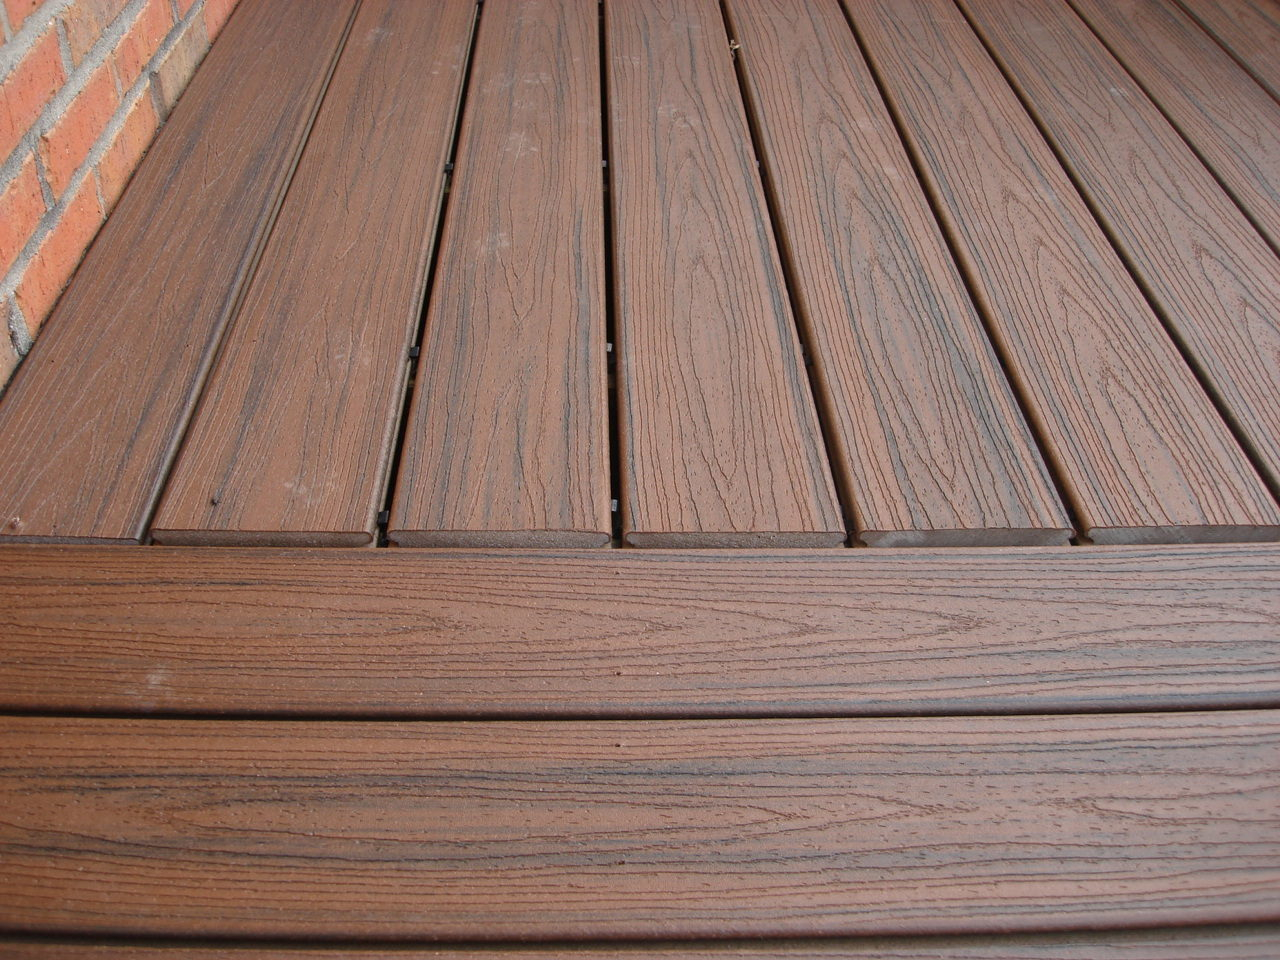 length of trex deck boards